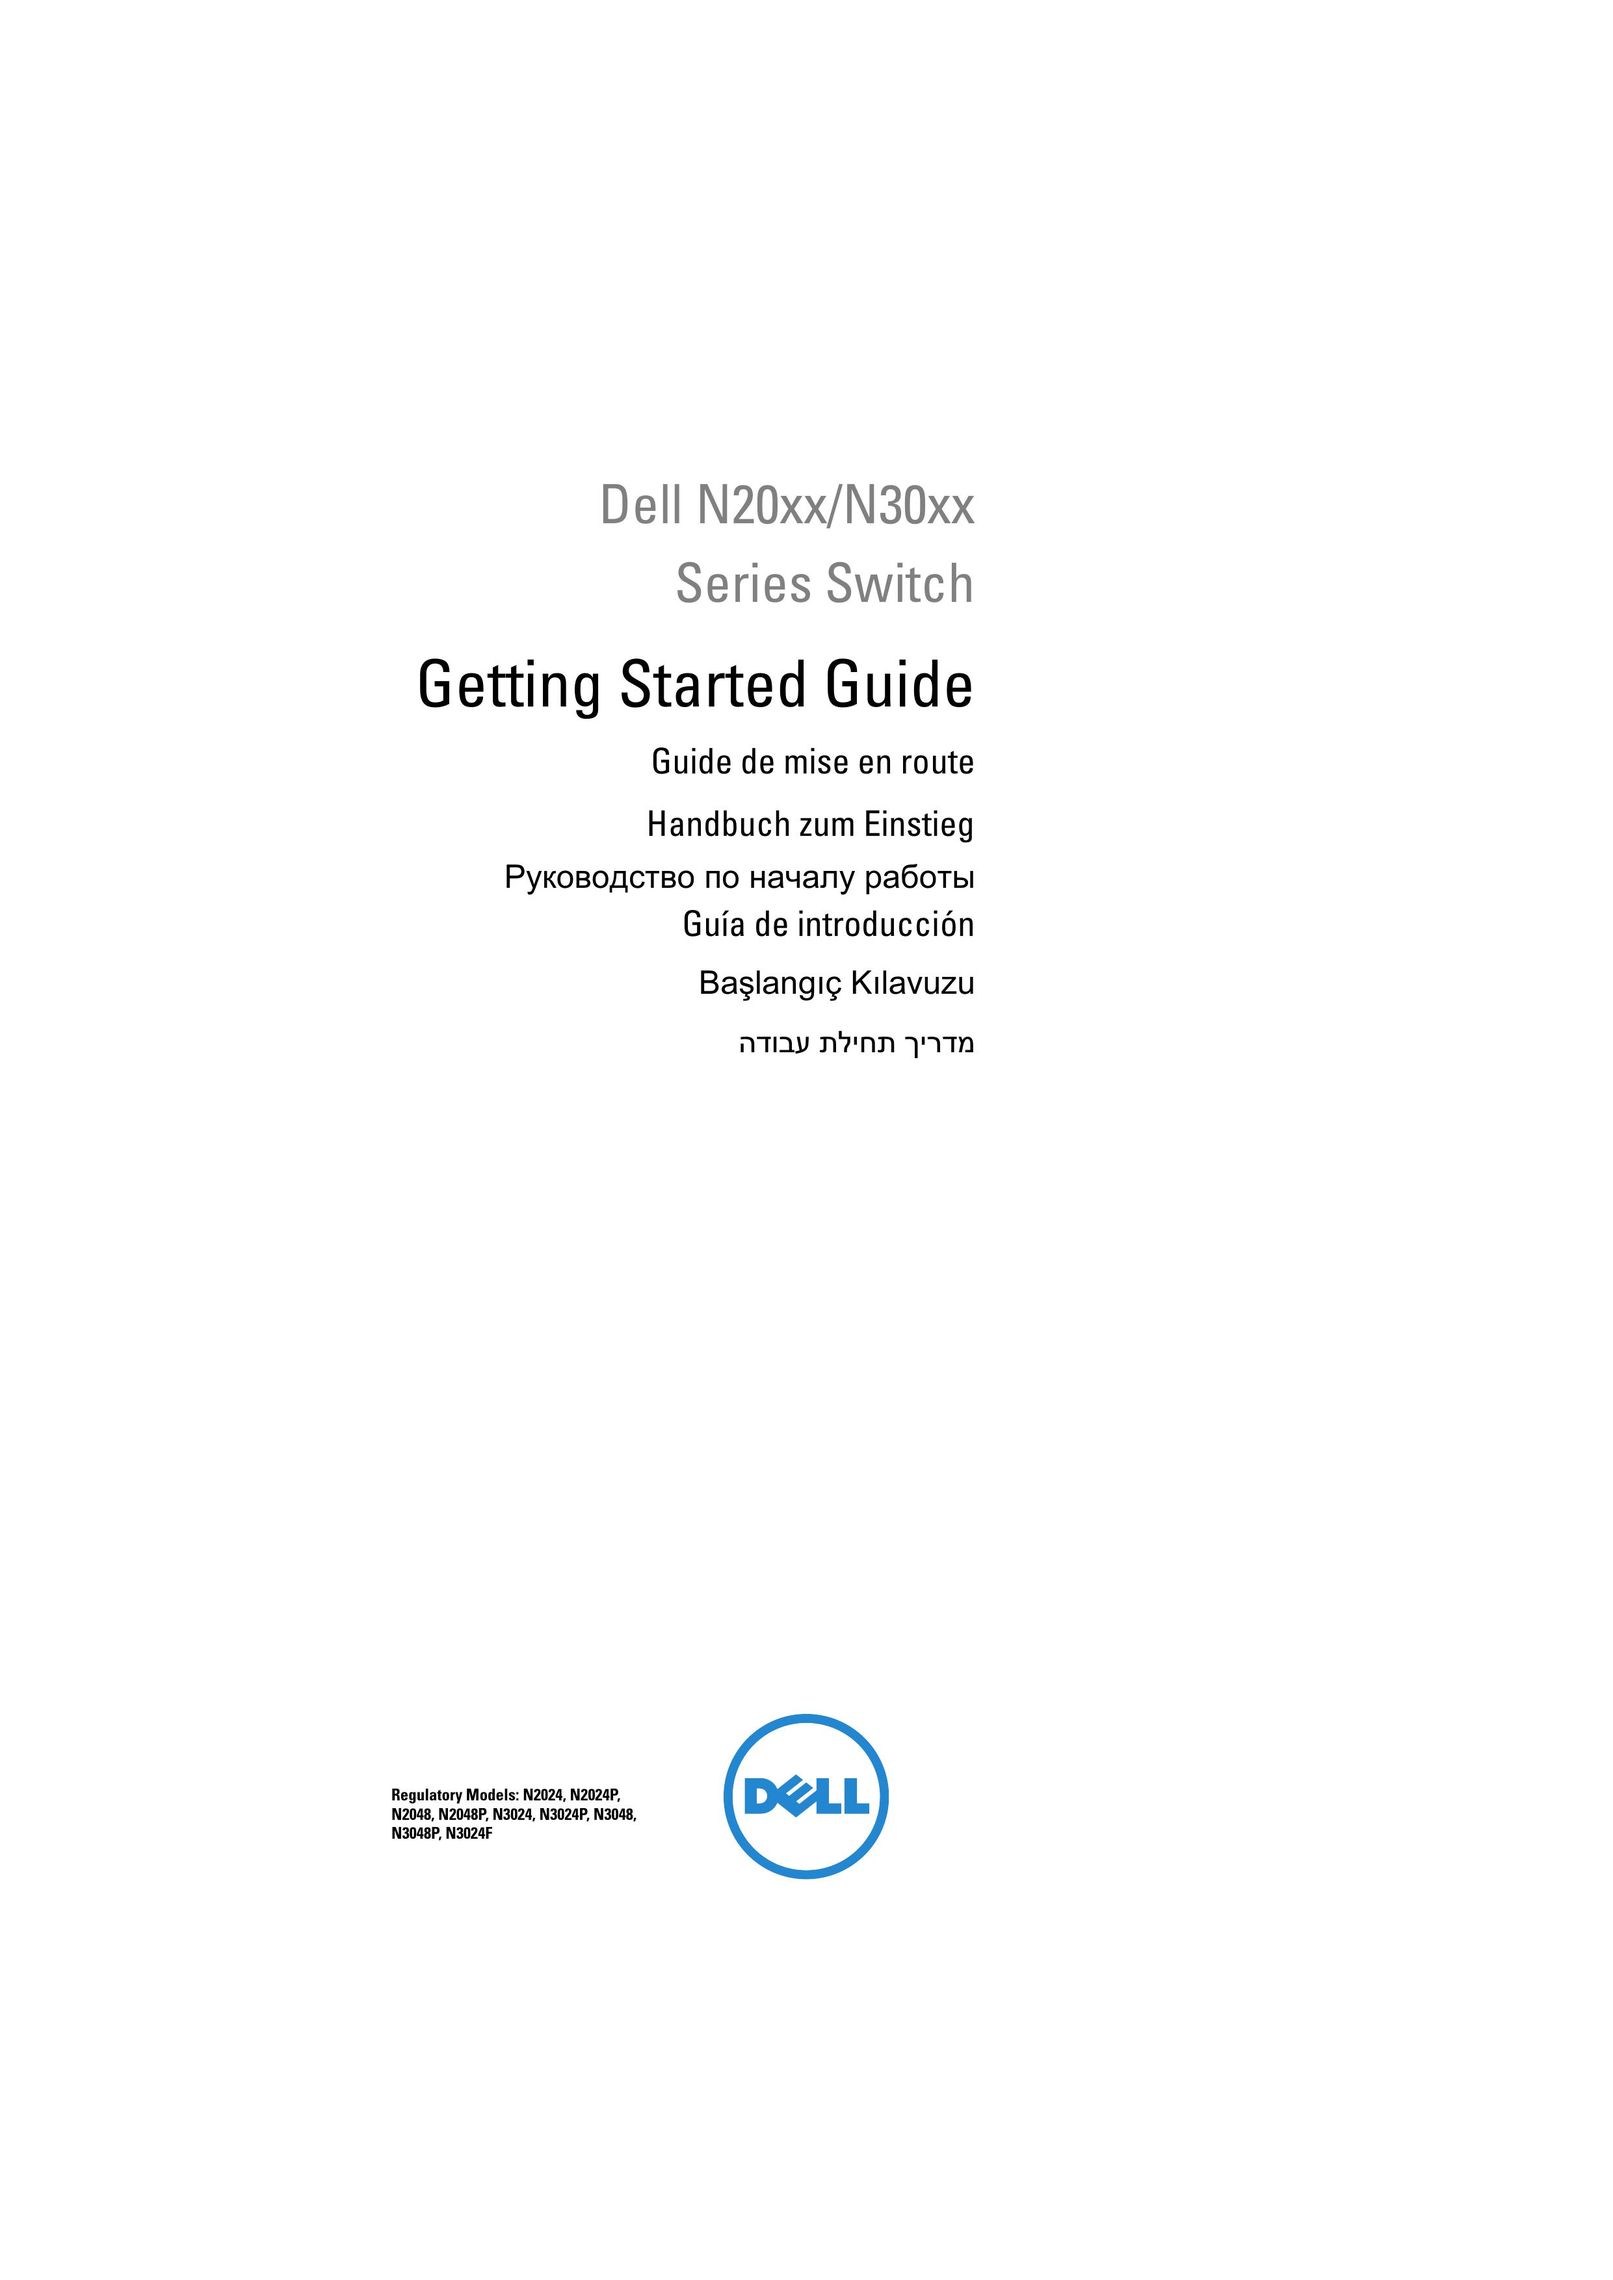 Dell N30xx Plumbing Product User Manual